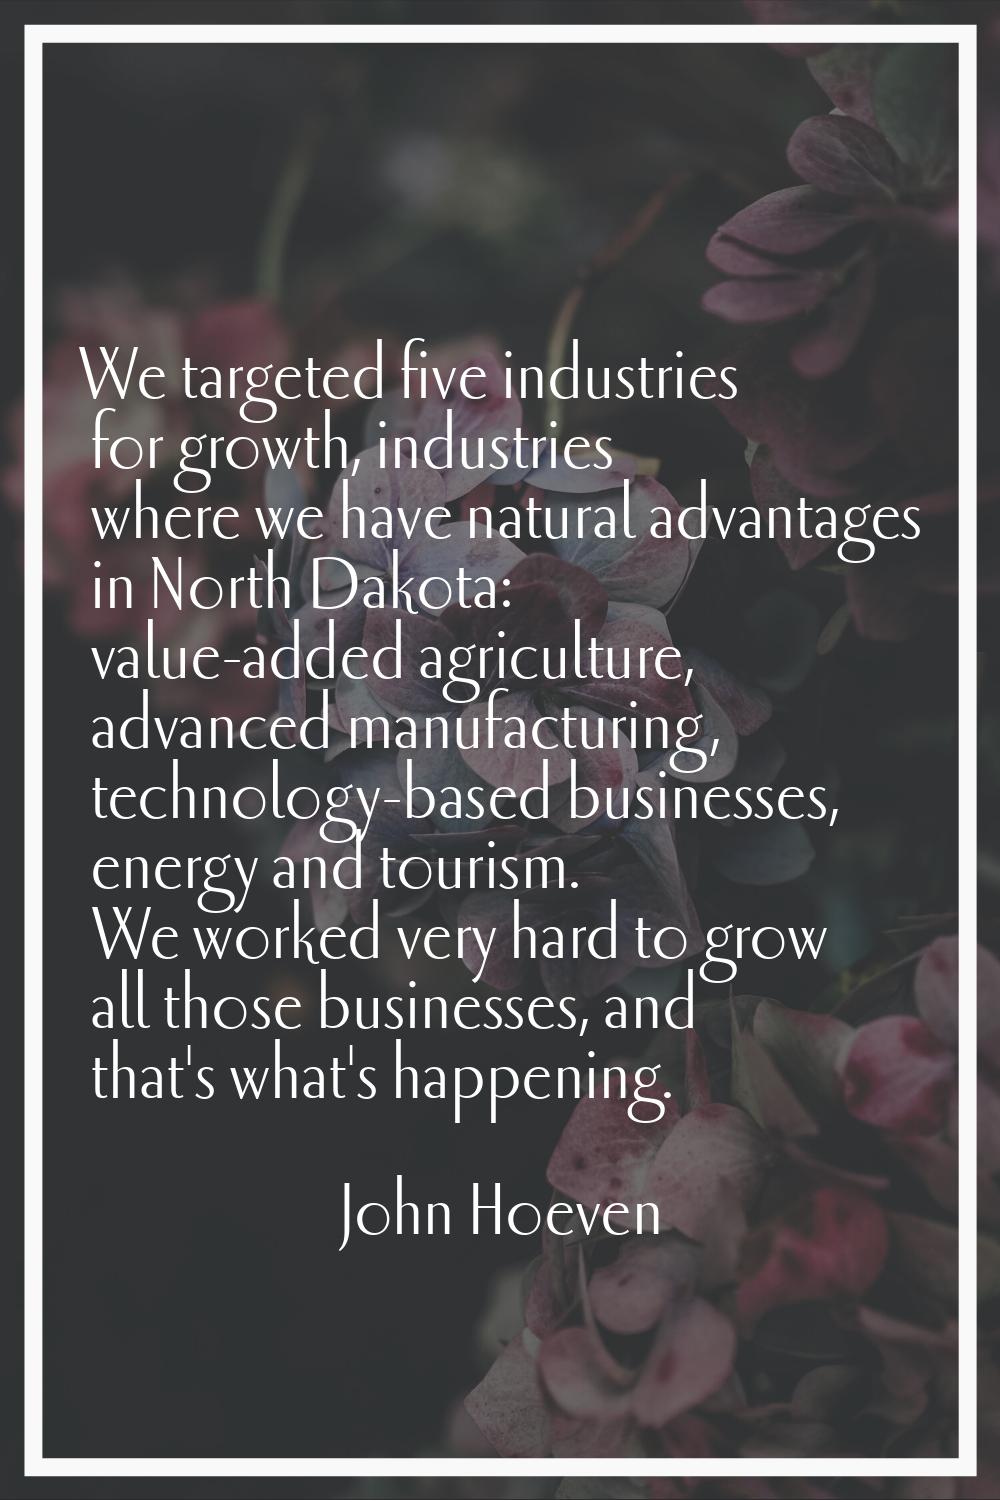 We targeted five industries for growth, industries where we have natural advantages in North Dakota